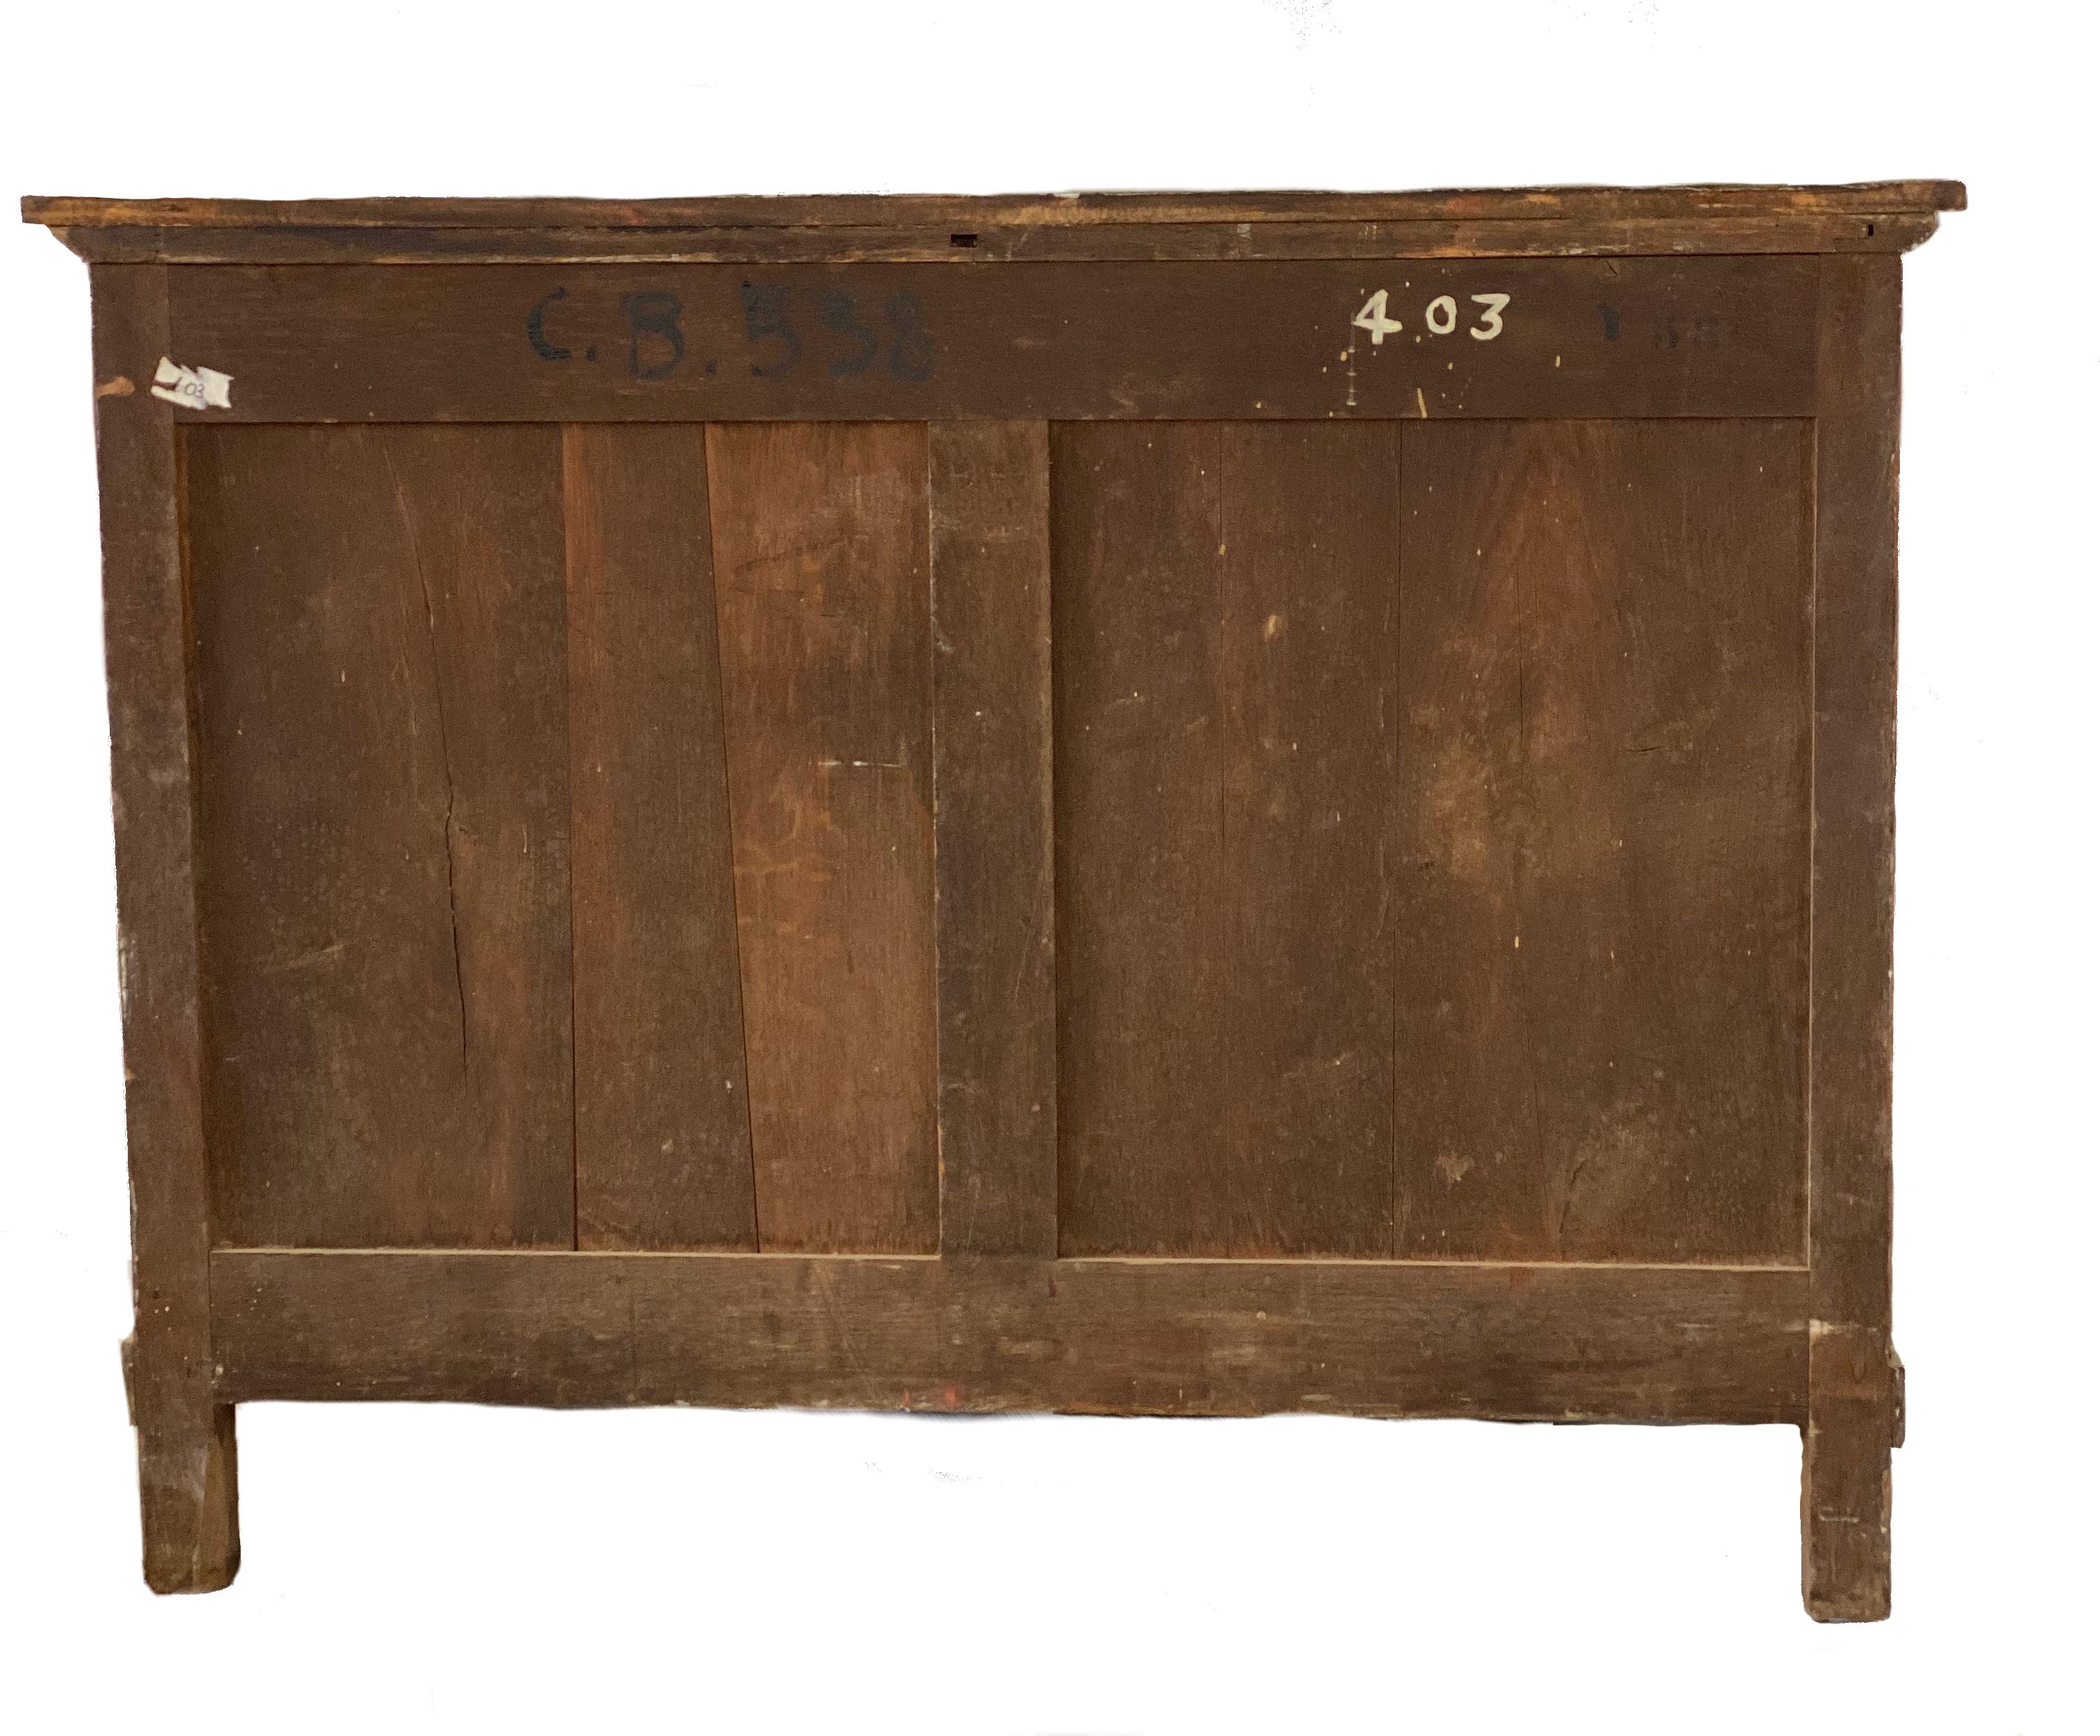 French neoclassical chest dating from the first half of the 19th century painted in green. The chest has three drawers and is decorated with family coat of arm and various other motifs.